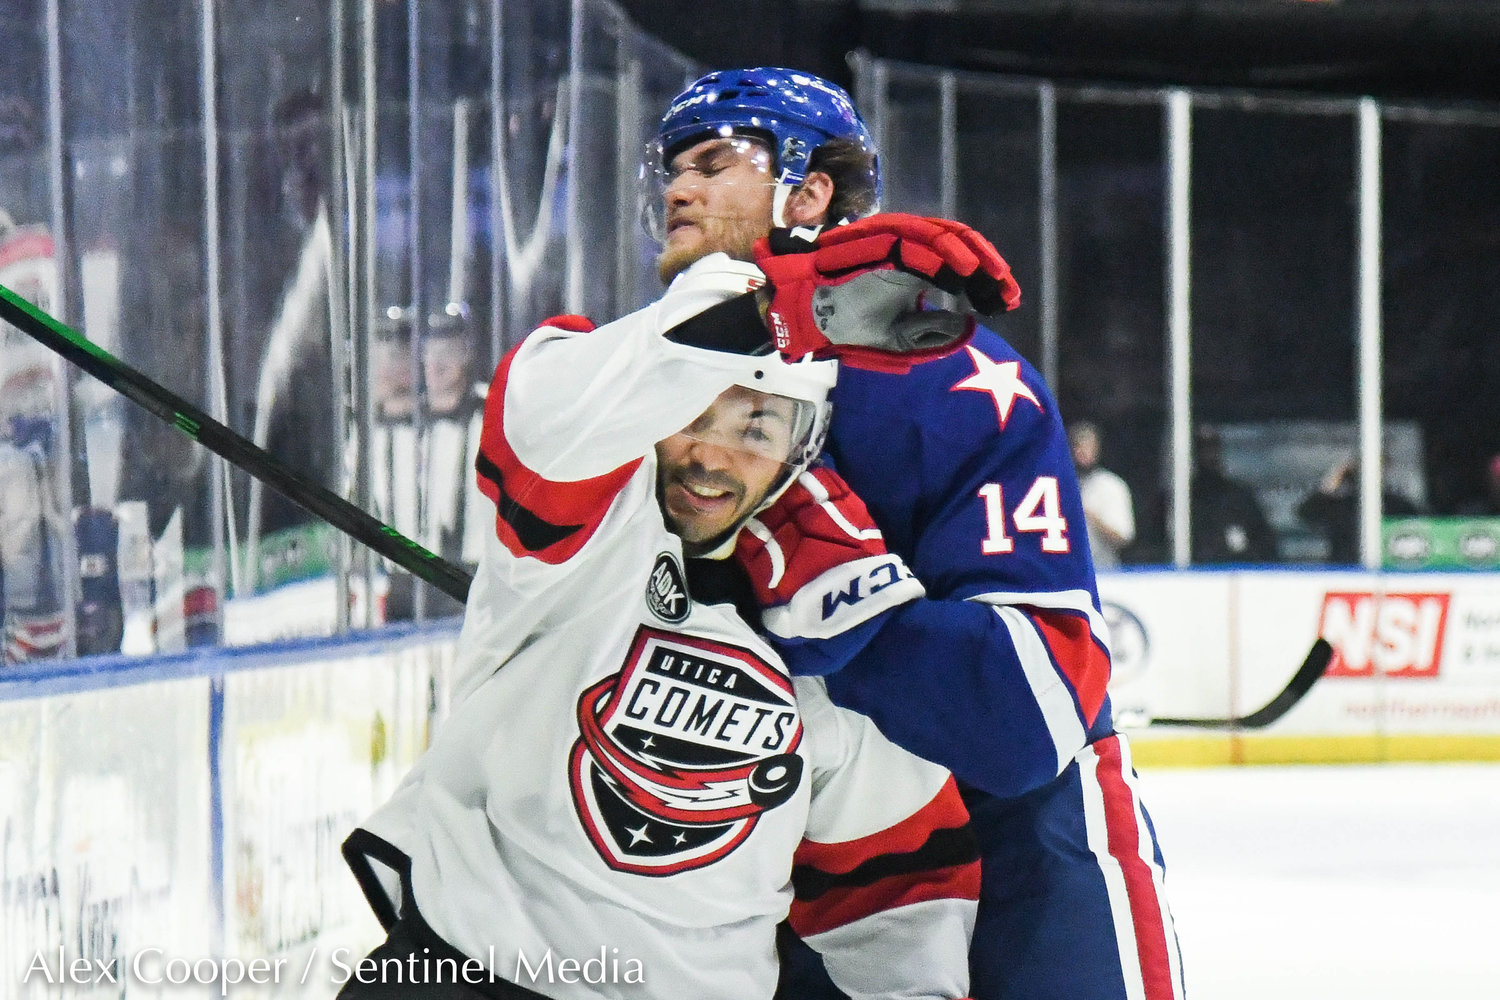 Comets player Robbie Russo is grabbed by Rochester's Mark Jankowski during the playoff game on Saturday.